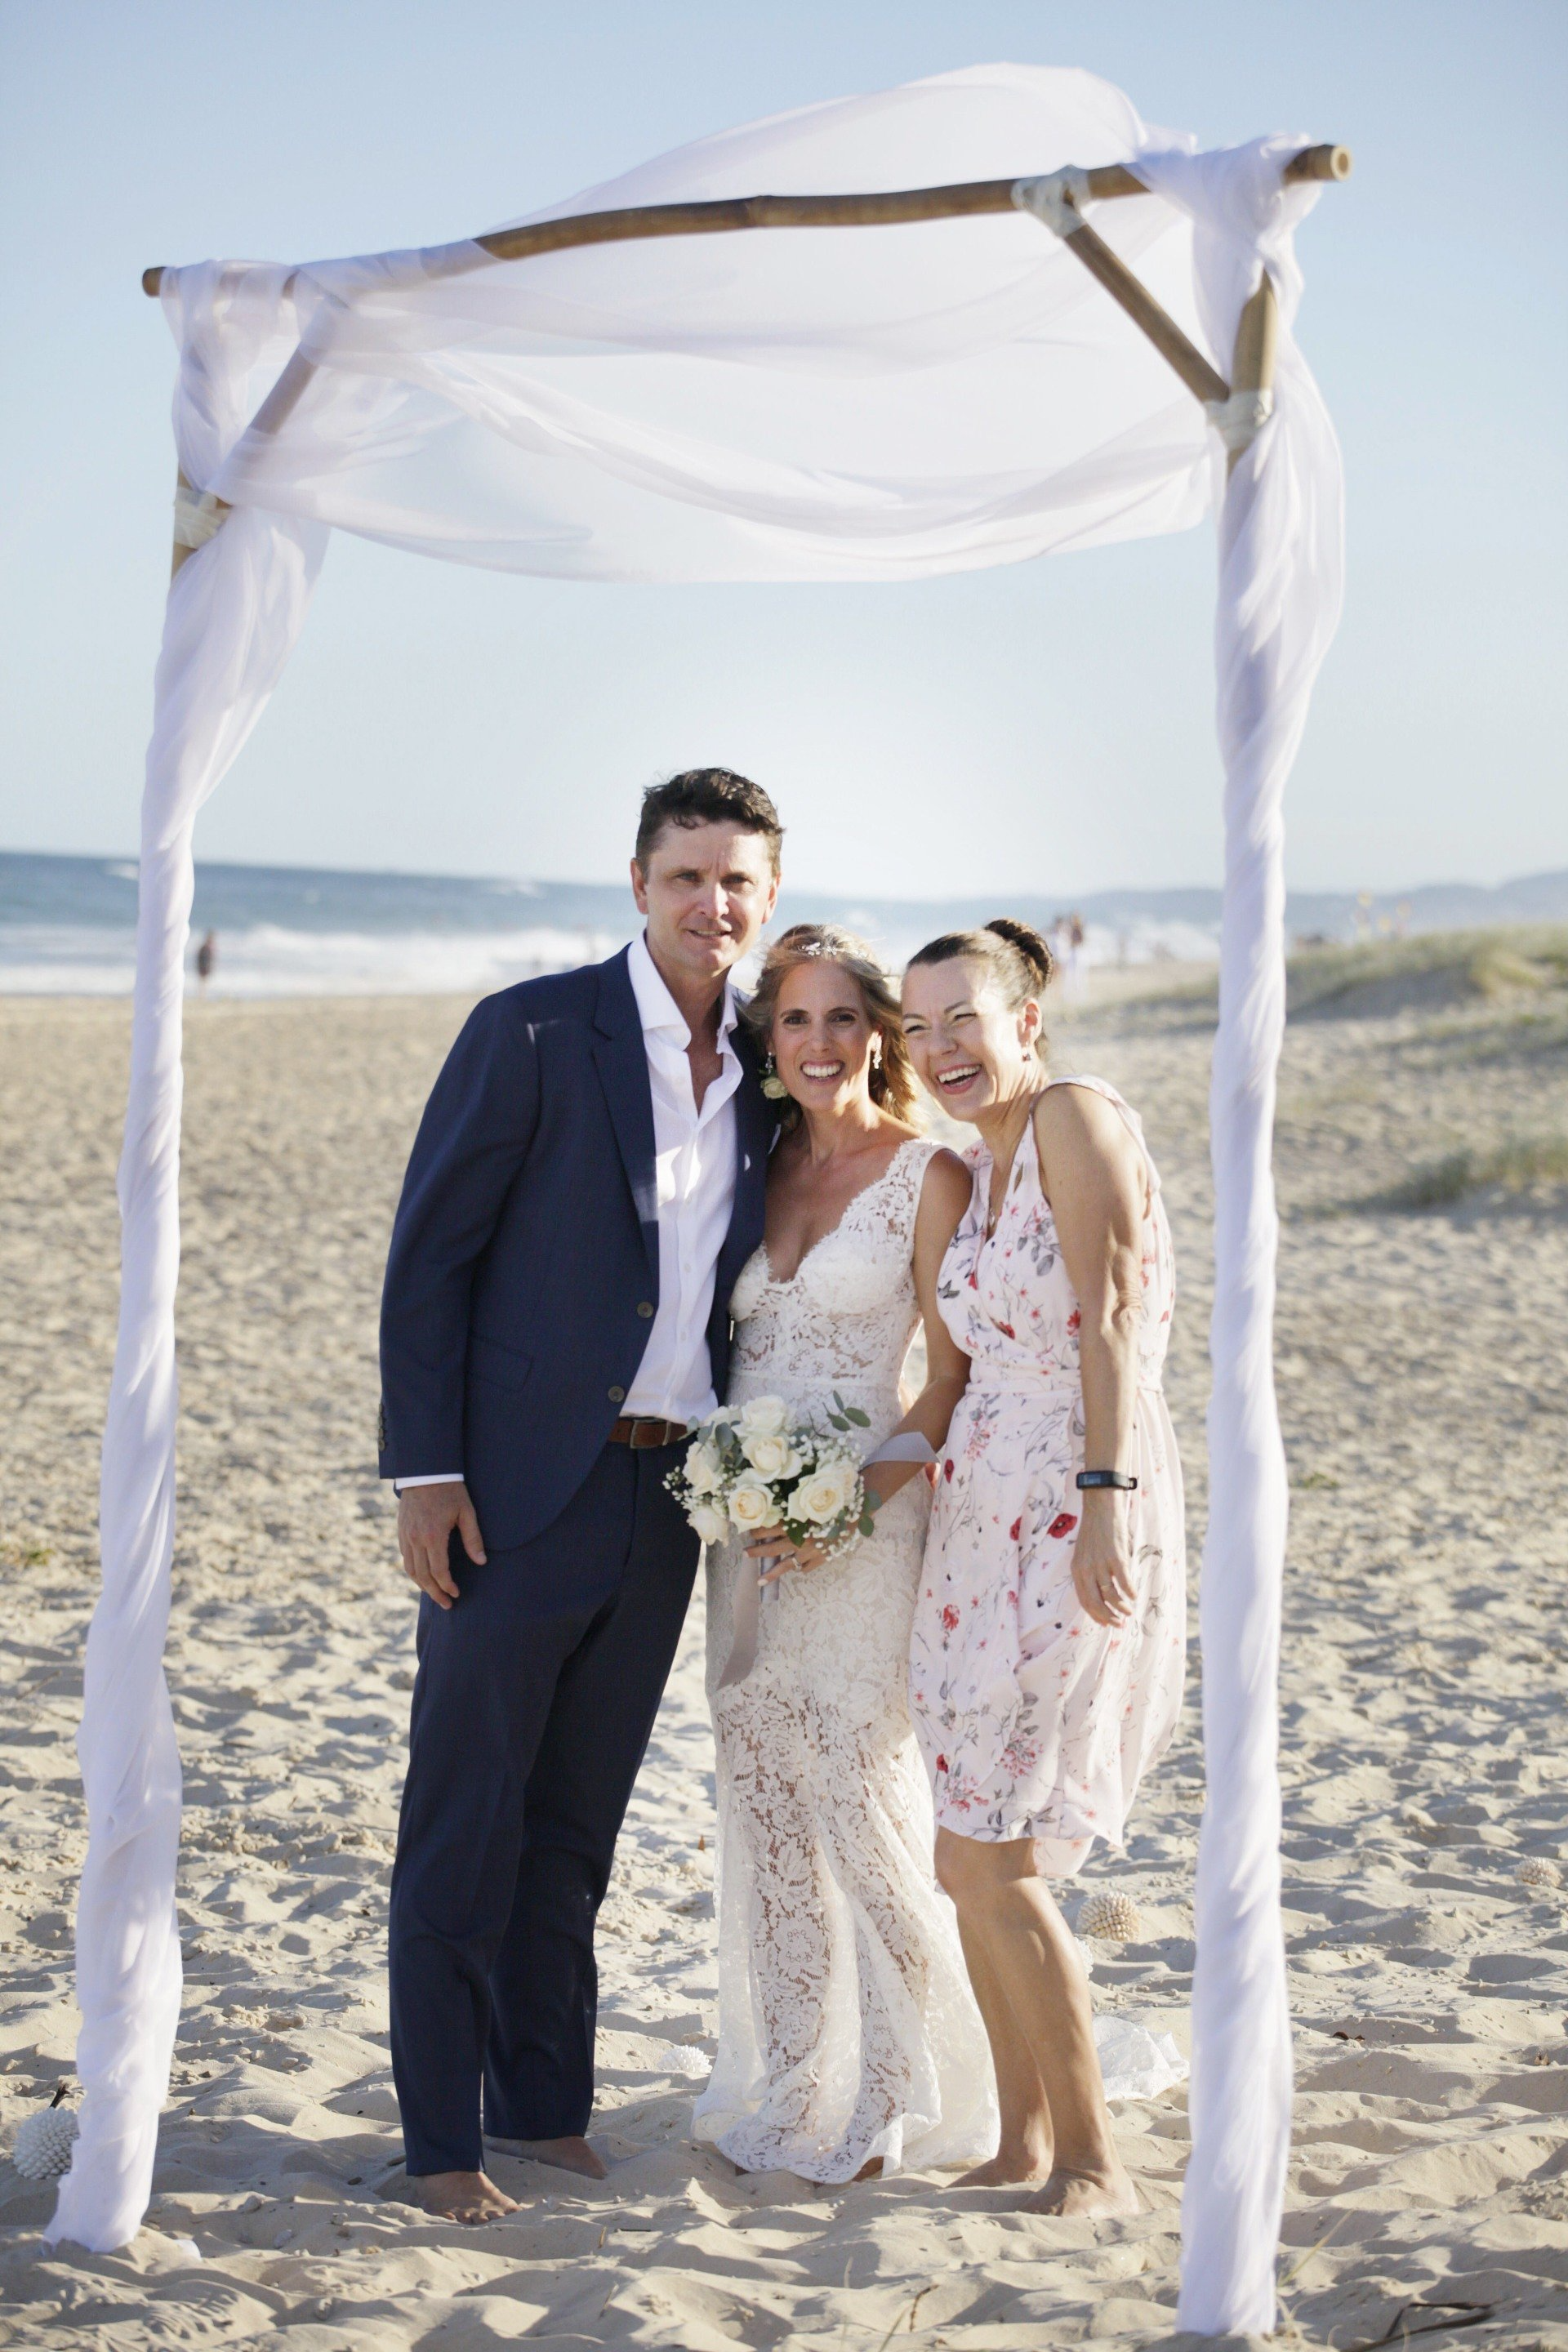 Couple marrying in Noosa Beach Wedding laughing under arbor